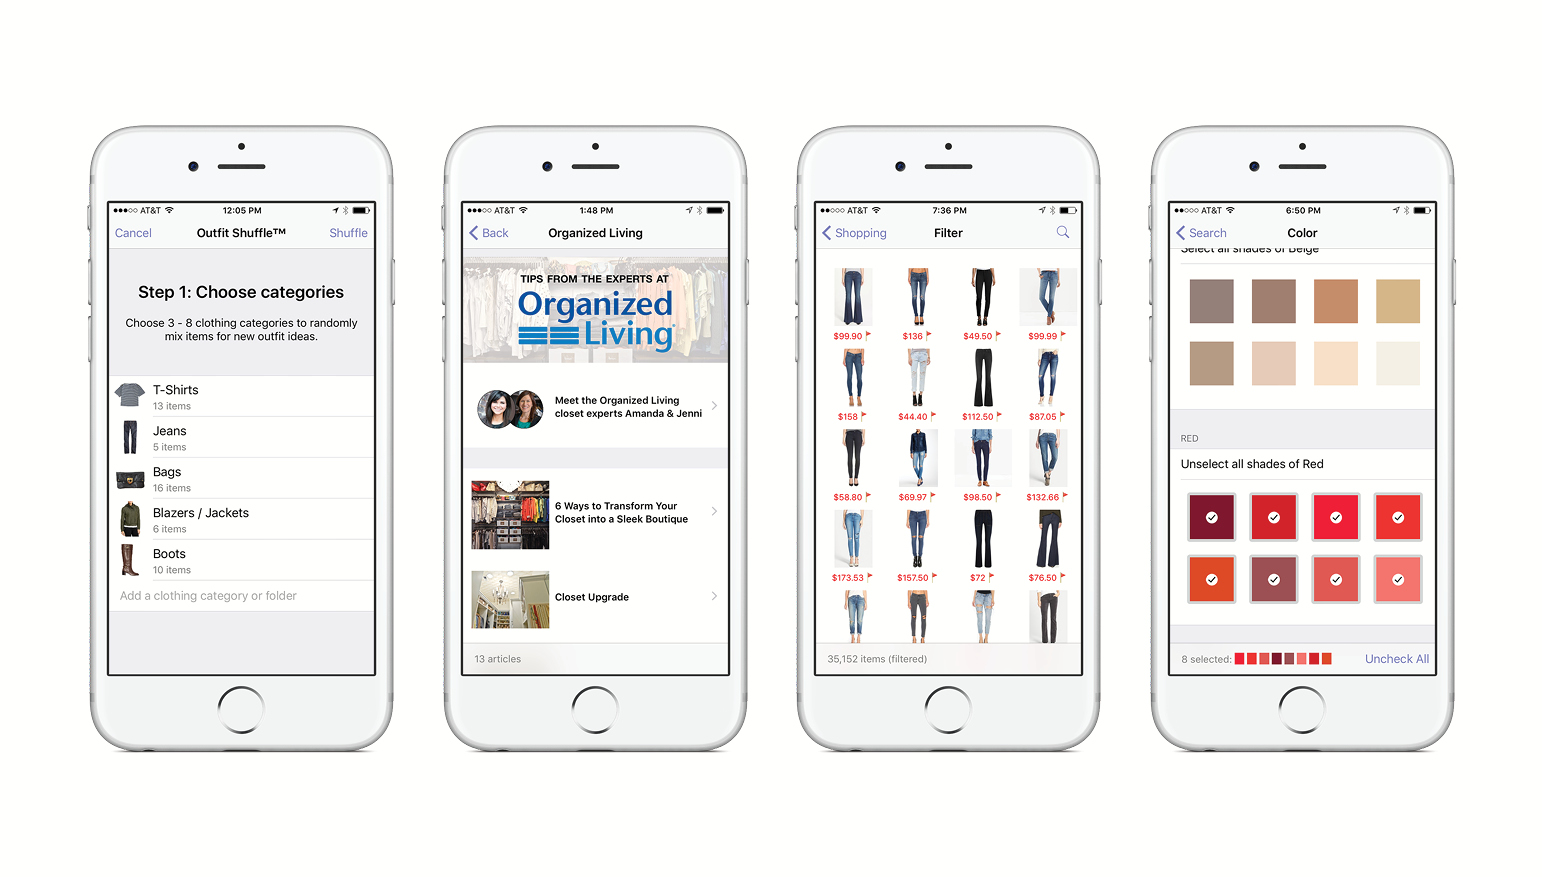 Stylebook Features (New in 7.0): Outfit Shuffle, Organized Living Tips, Shopping Search, Multiple Colors